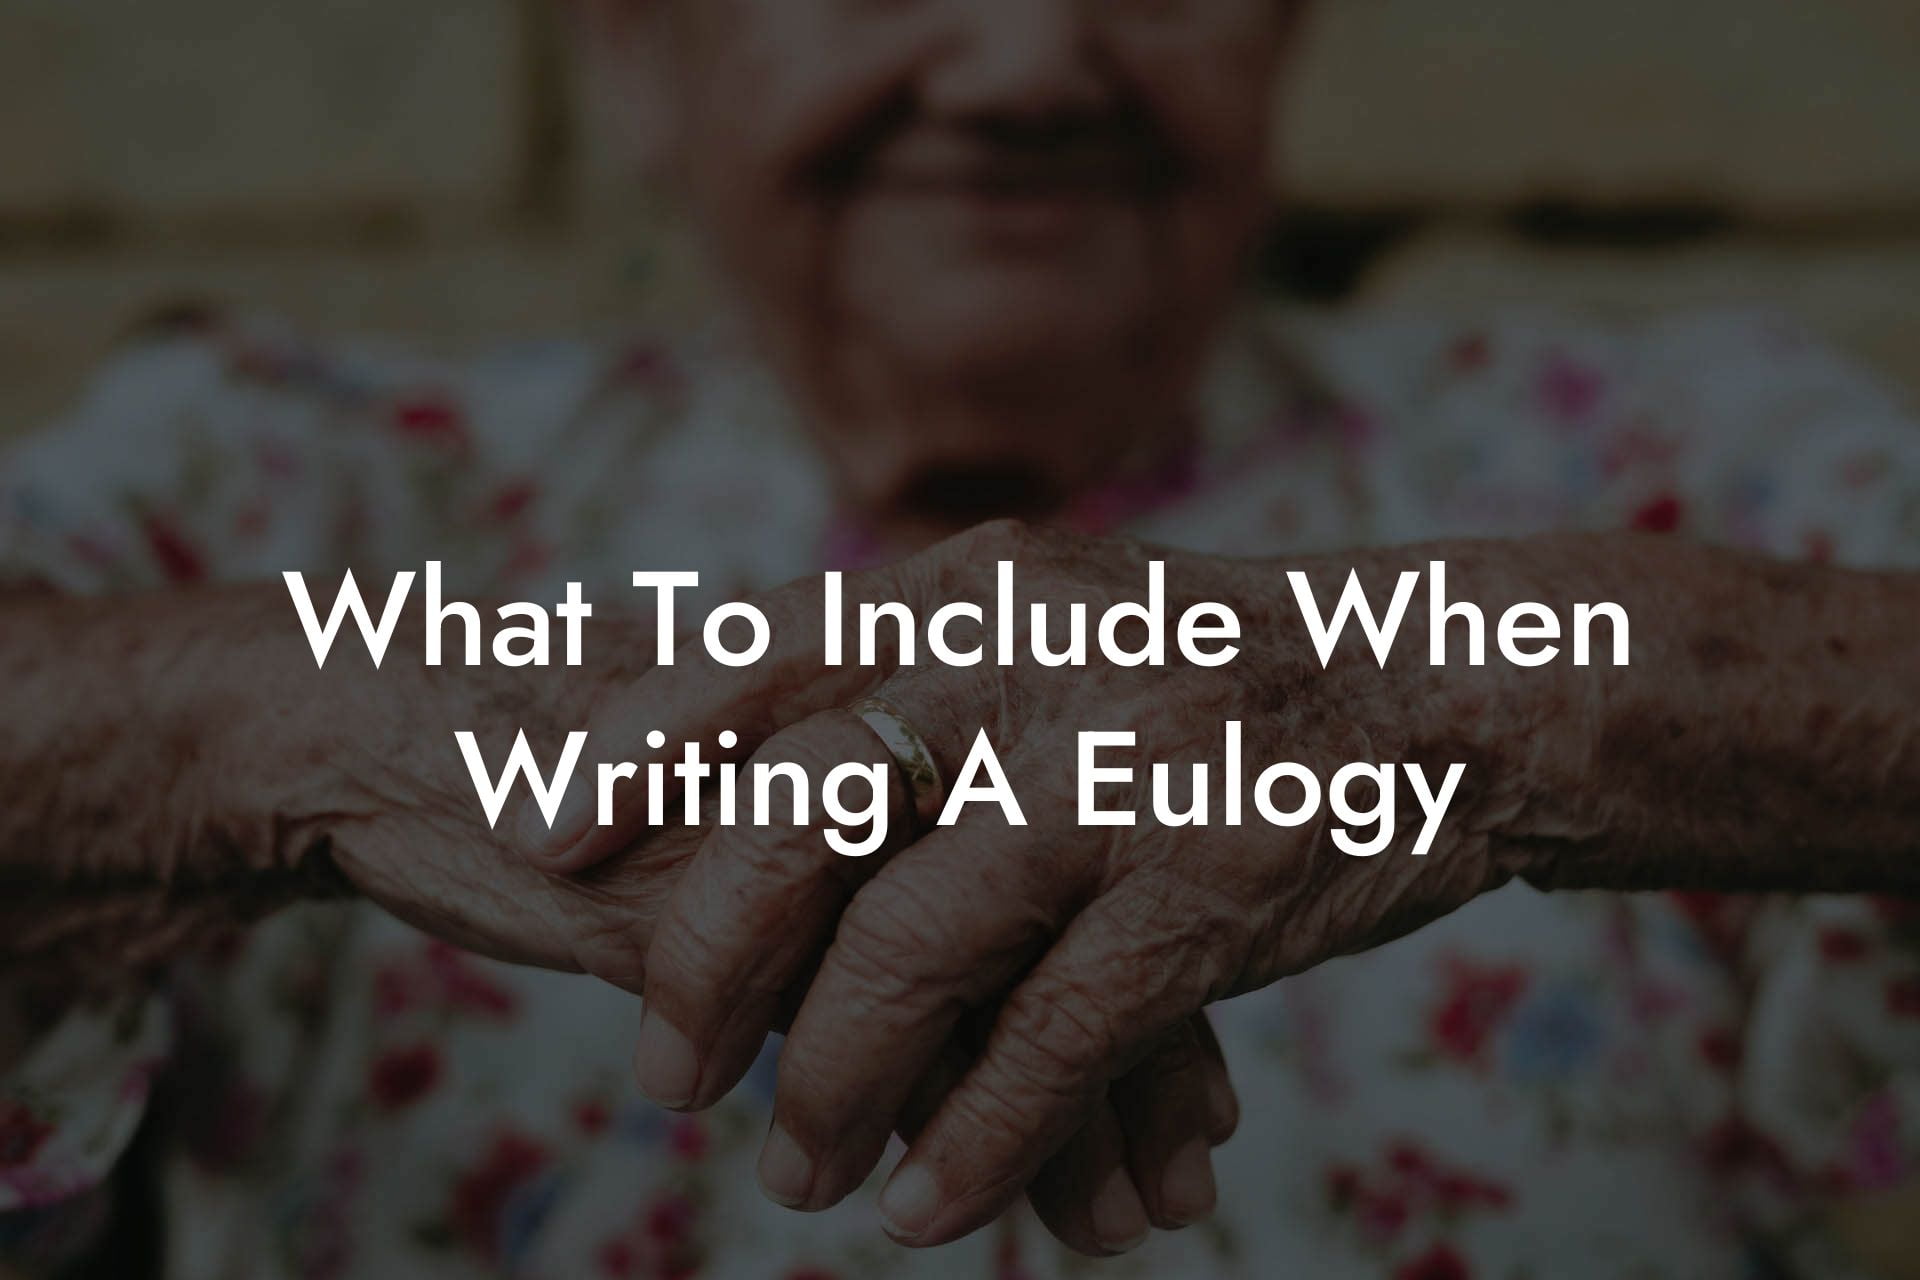 What To Include When Writing A Eulogy